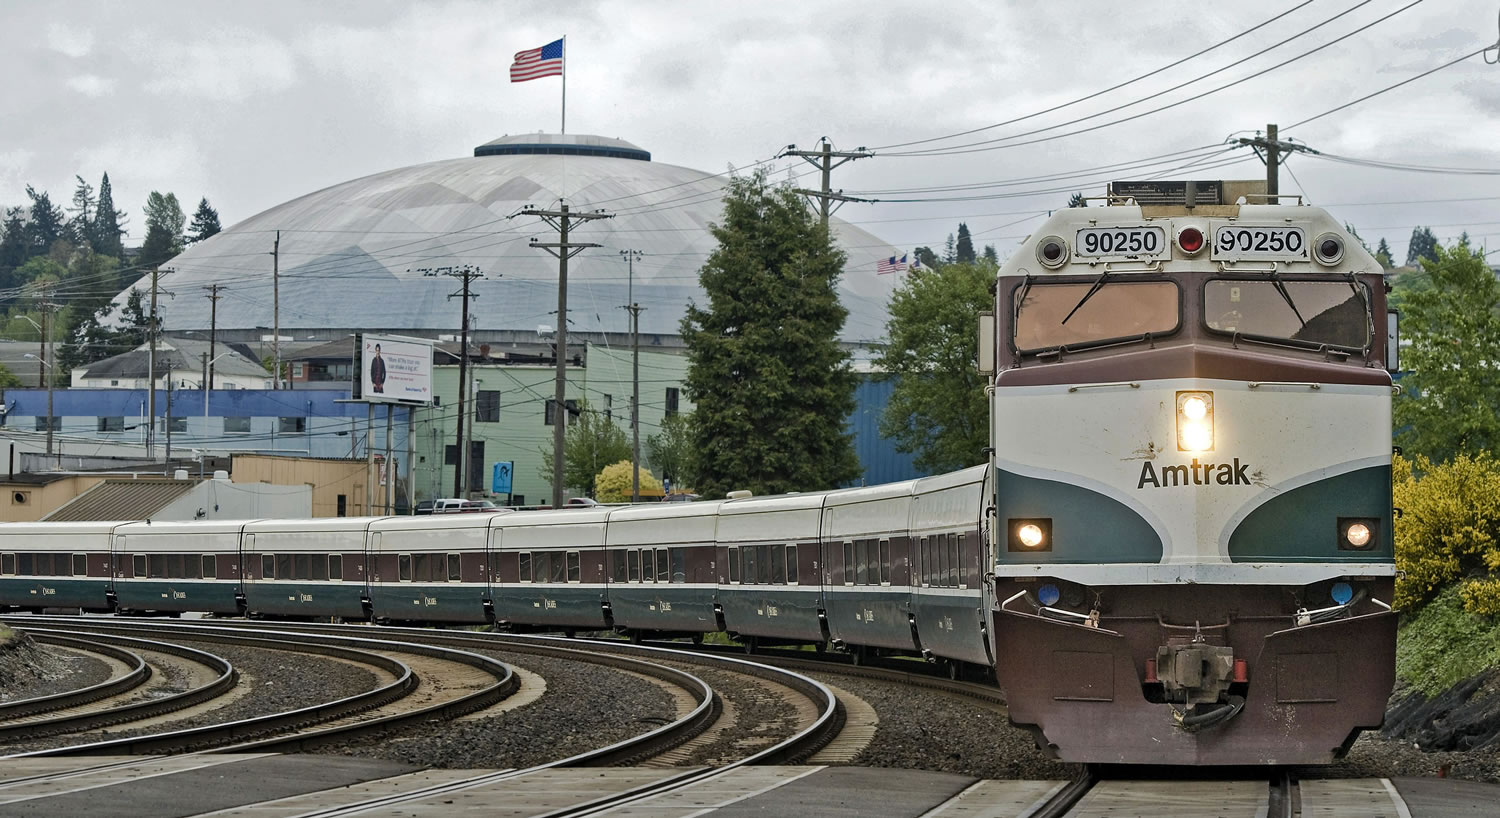 The Amtrak Cascades Train No. 513 passes the Tacoma Dome and heads south toward downtown Tacoma on May 16.